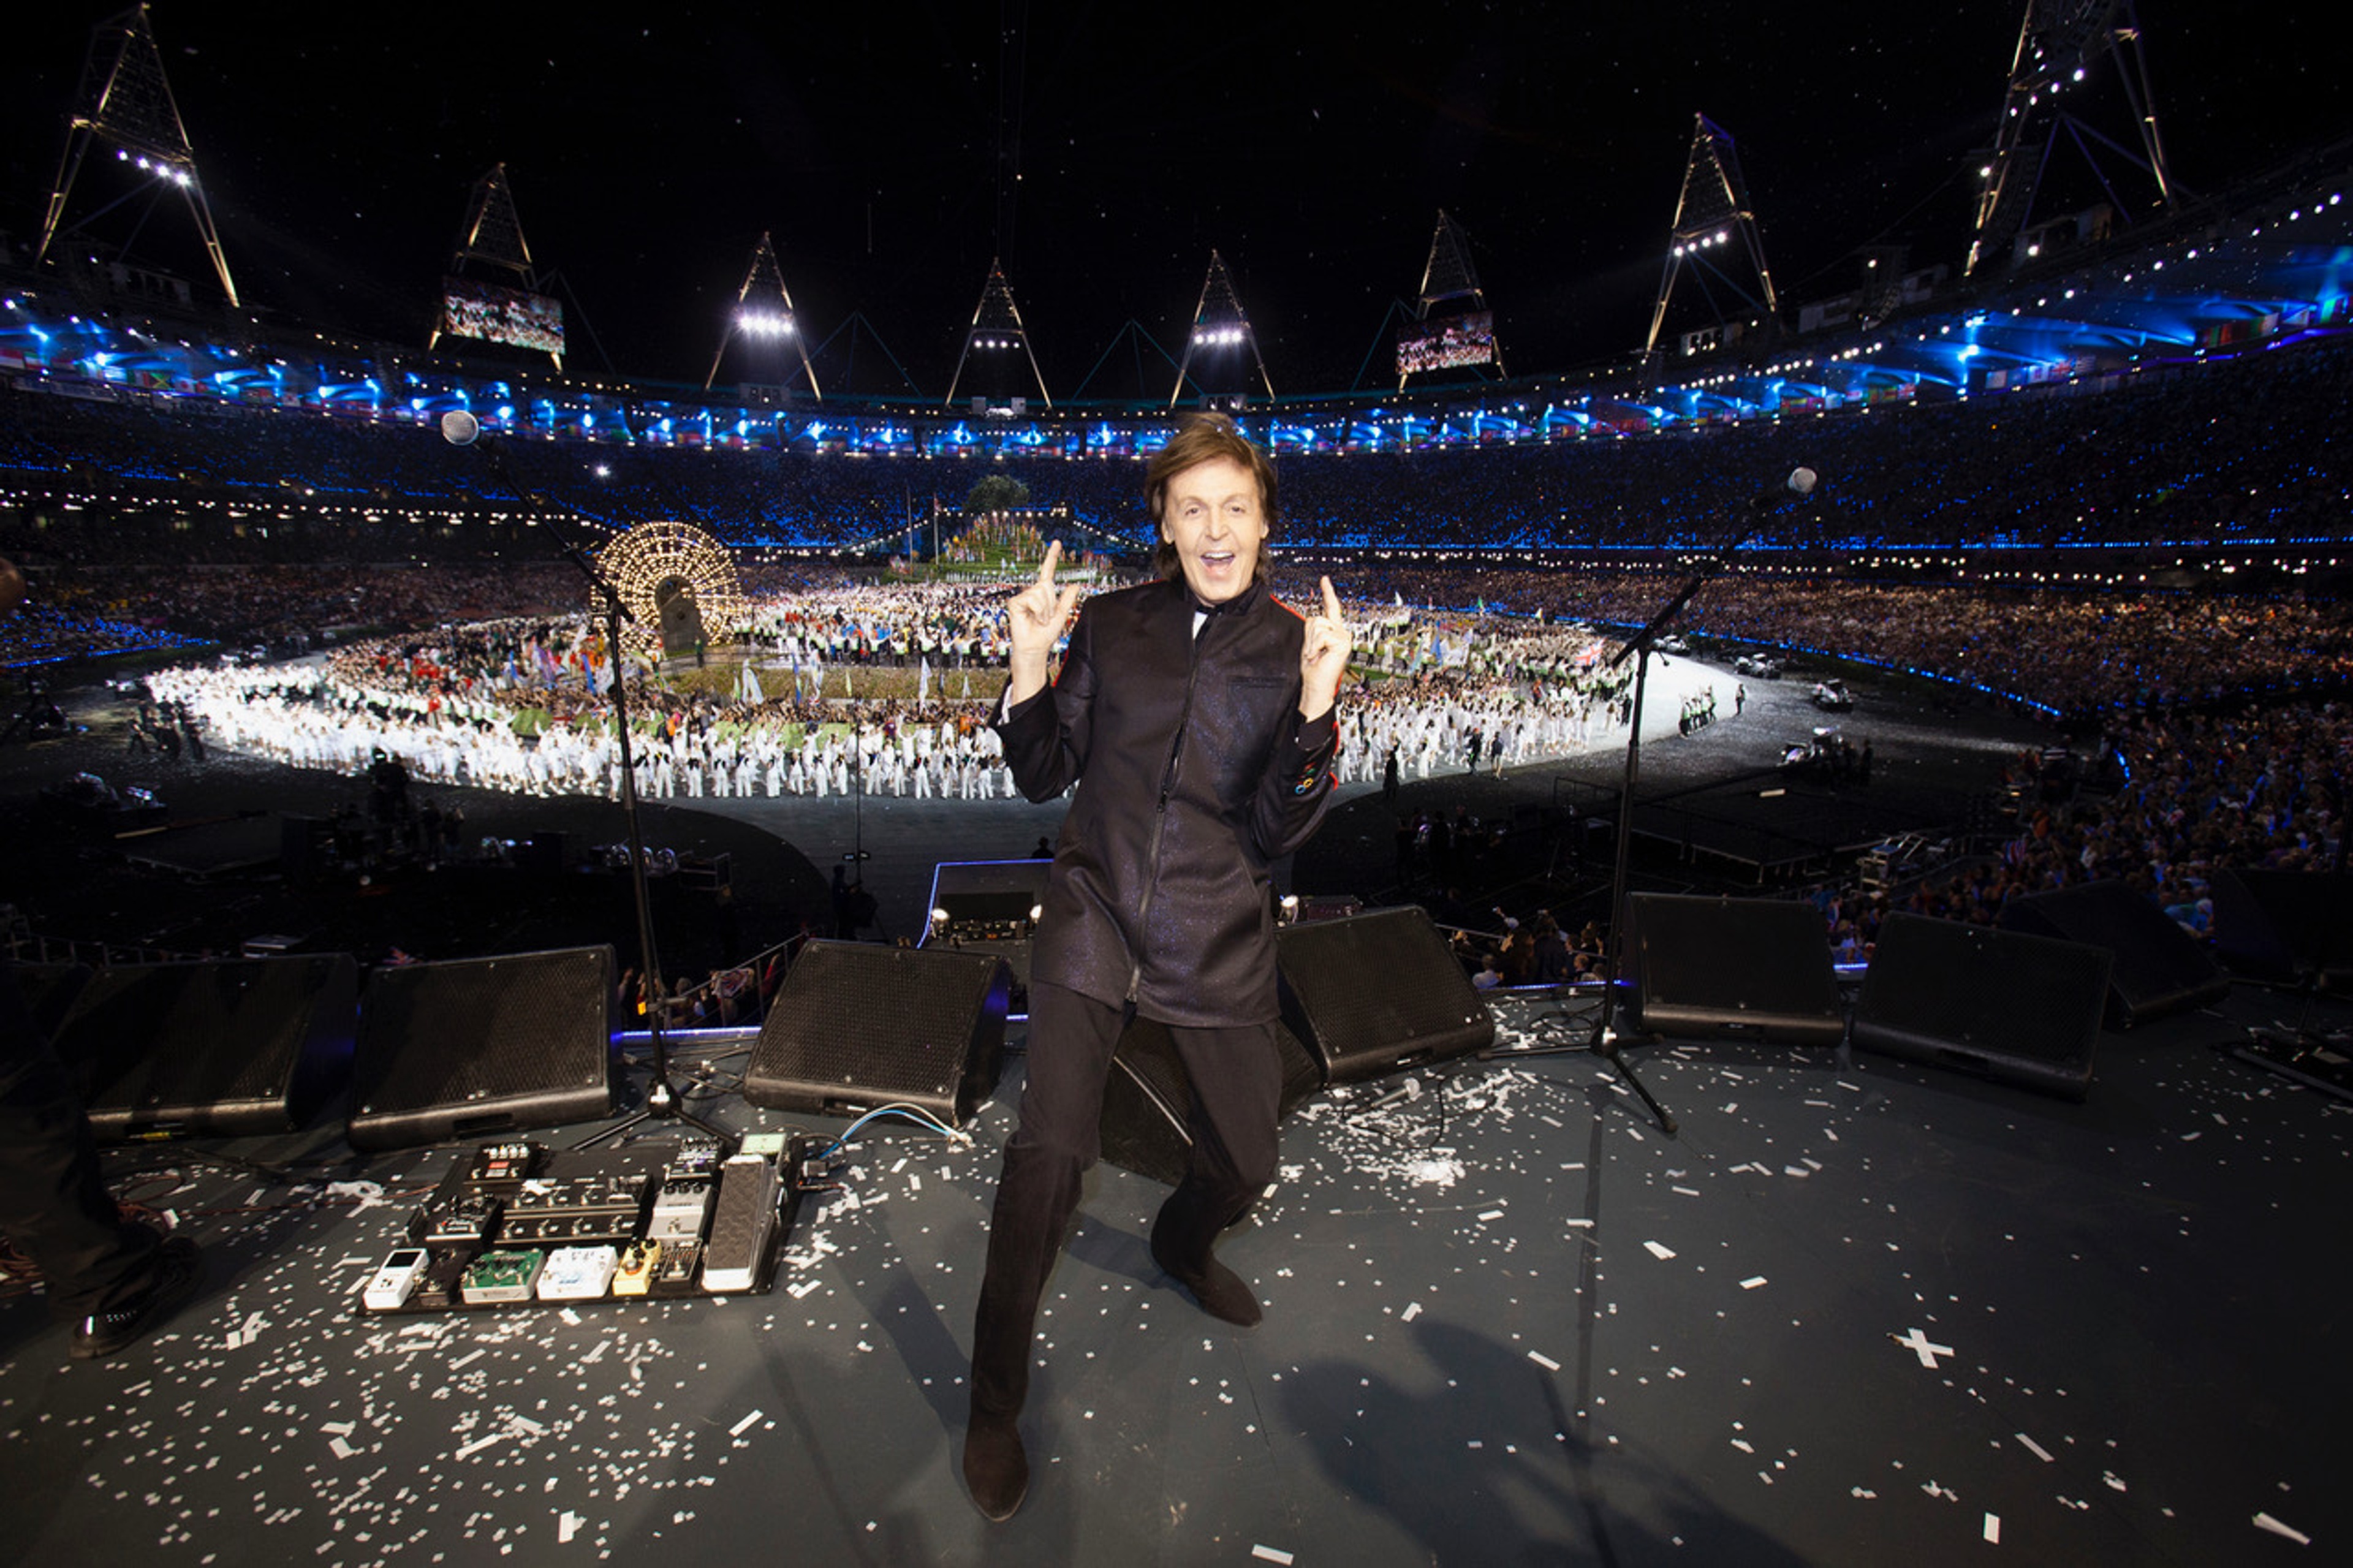 Paul on stage at the Olympic Opening Ceremony, London 2012